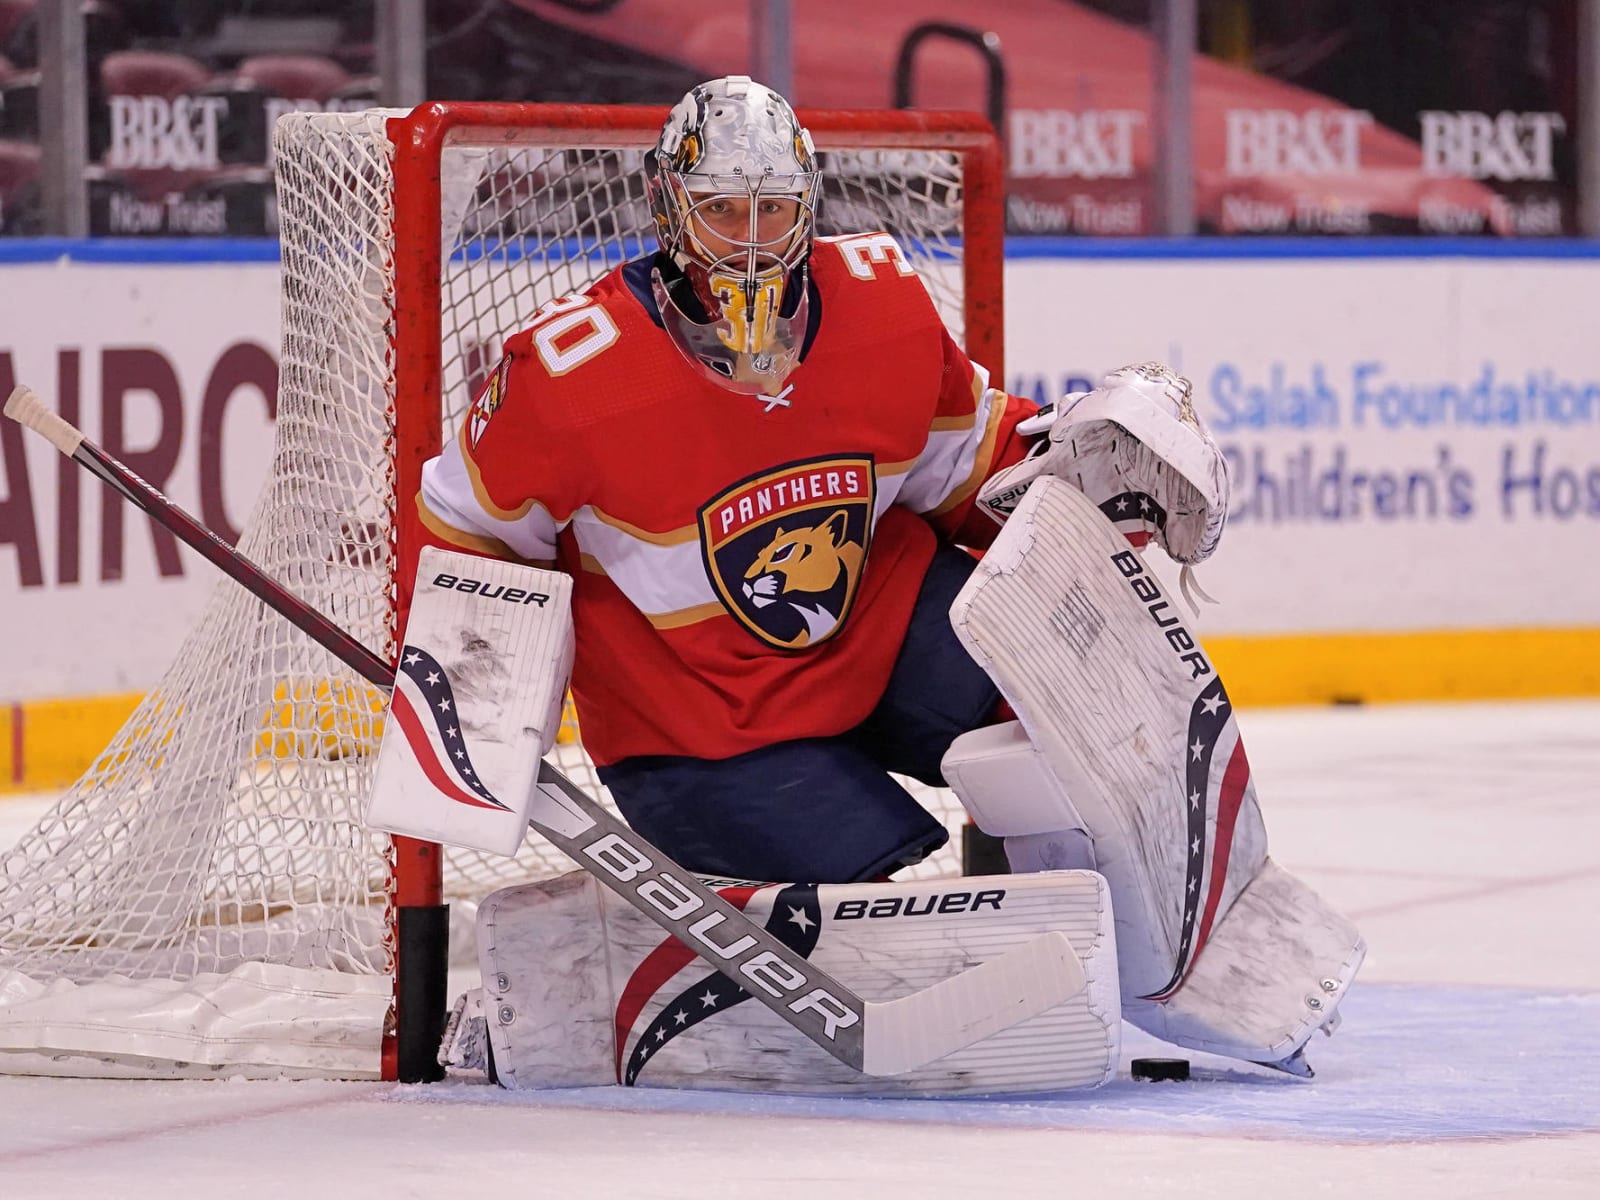 Spencer Knight to Make NHL Debut for Florida Panthers - Boston